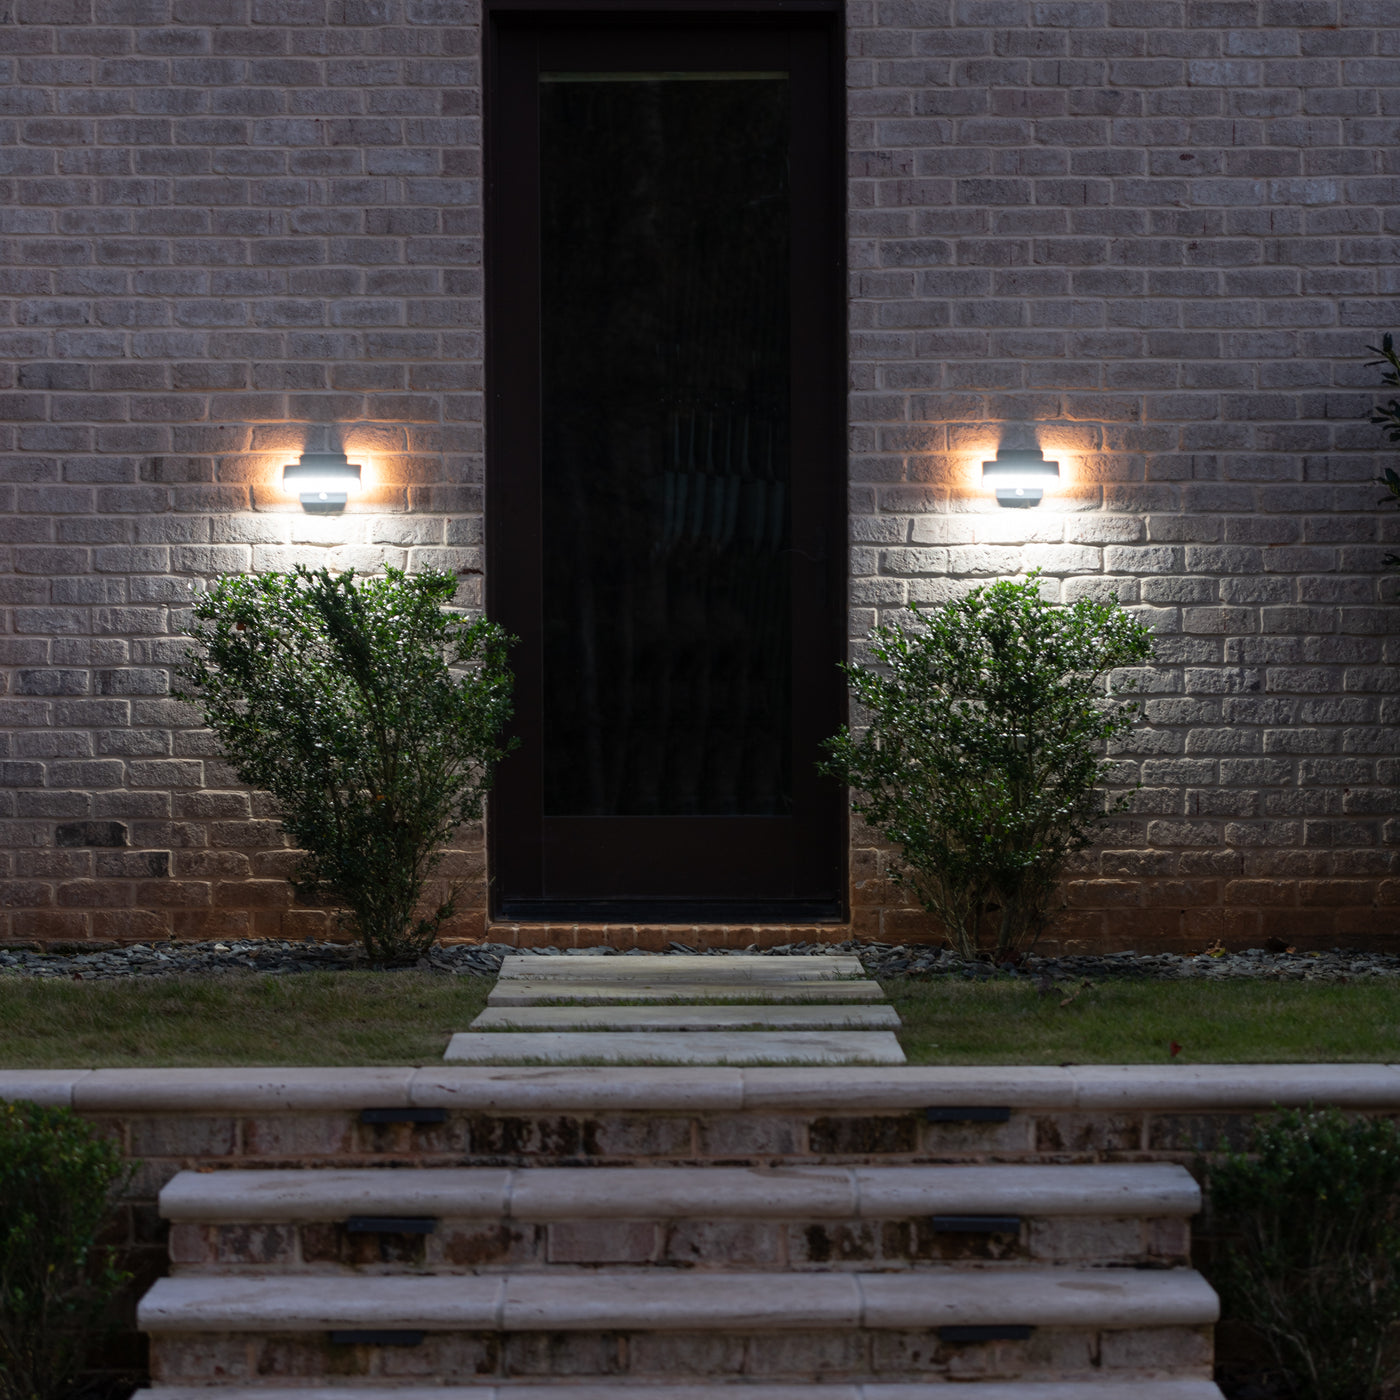 2PK Architectural Solar Wall Accent Light with Motion Sensor, 120 Lumens, 1.2W, 2700 CCT, Black or Bronze Finish